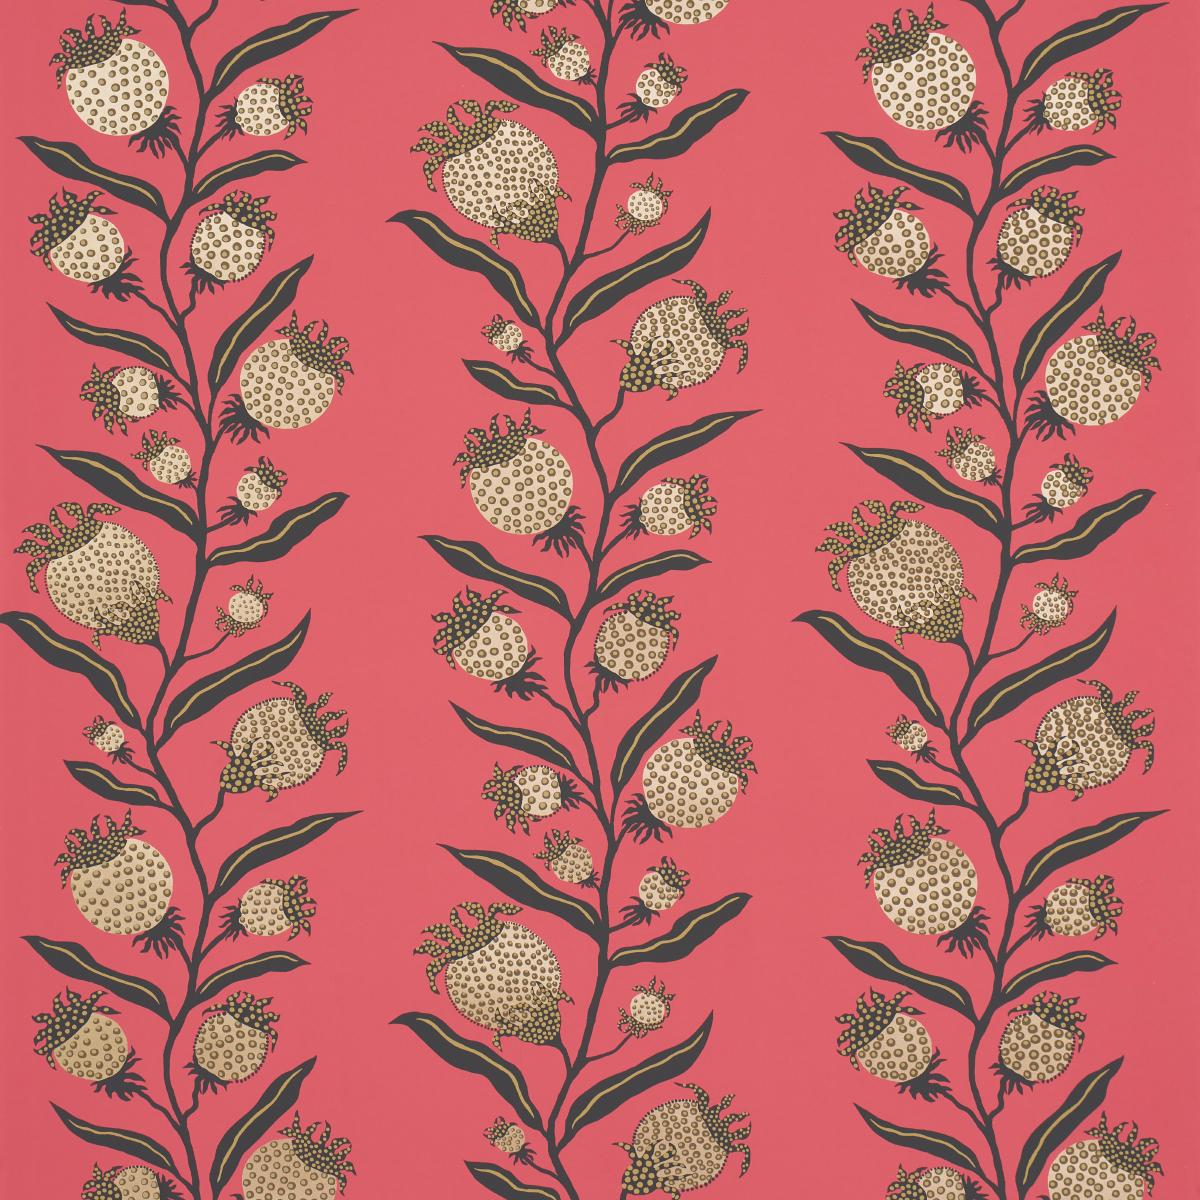 THISTLE VINE_RED & GOLD